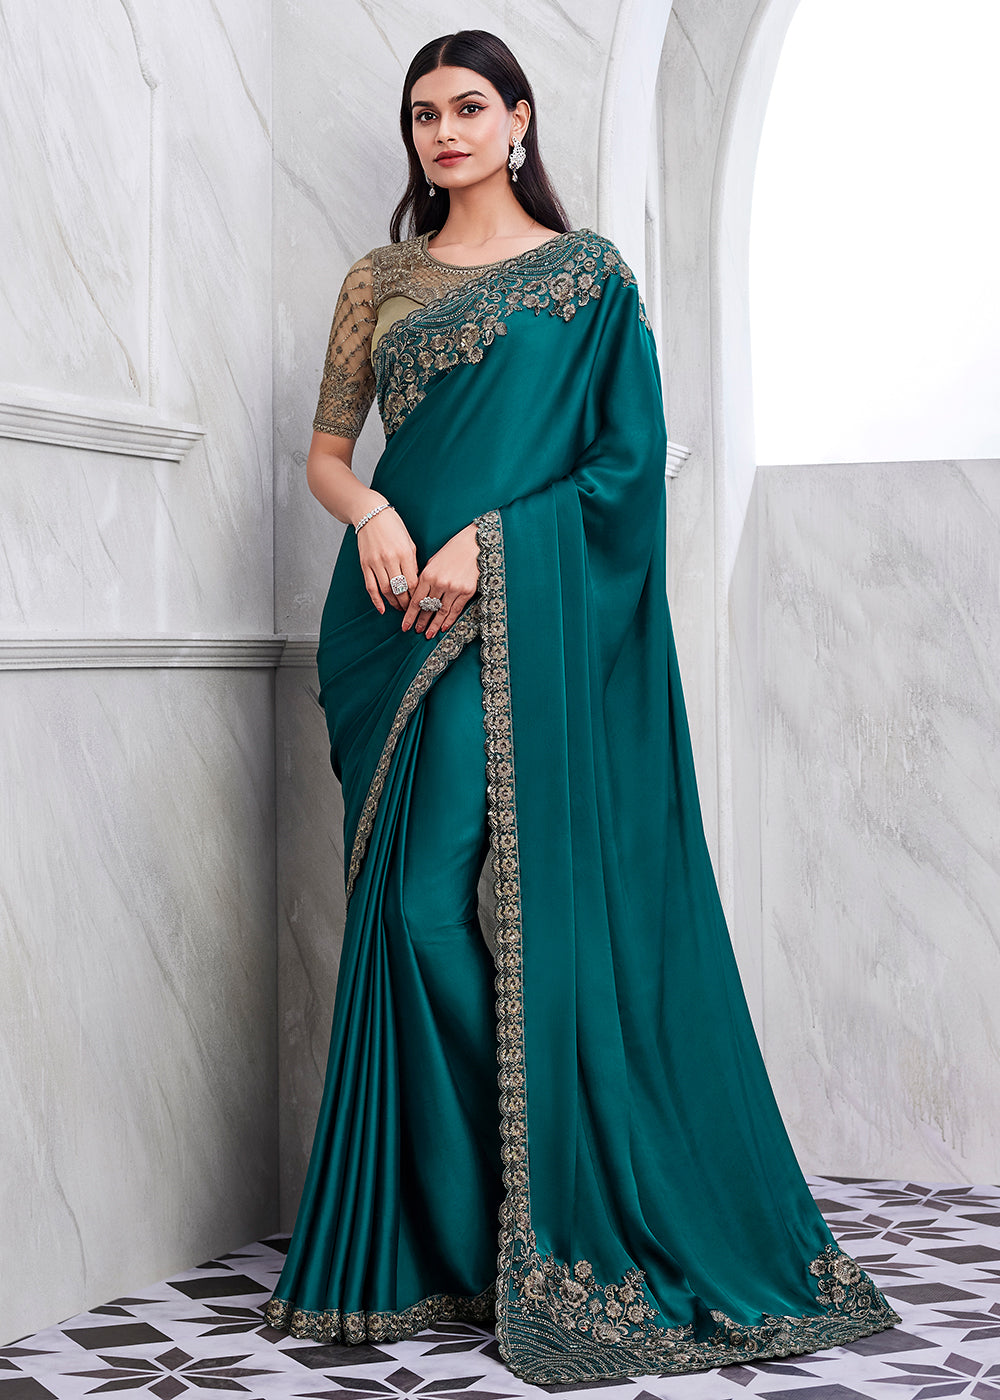 Buy Now Lovely Teal Blue Silk Embroidered Designer Saree Online in USA, UK, Canada & Worldwide at Empress Clothing. 